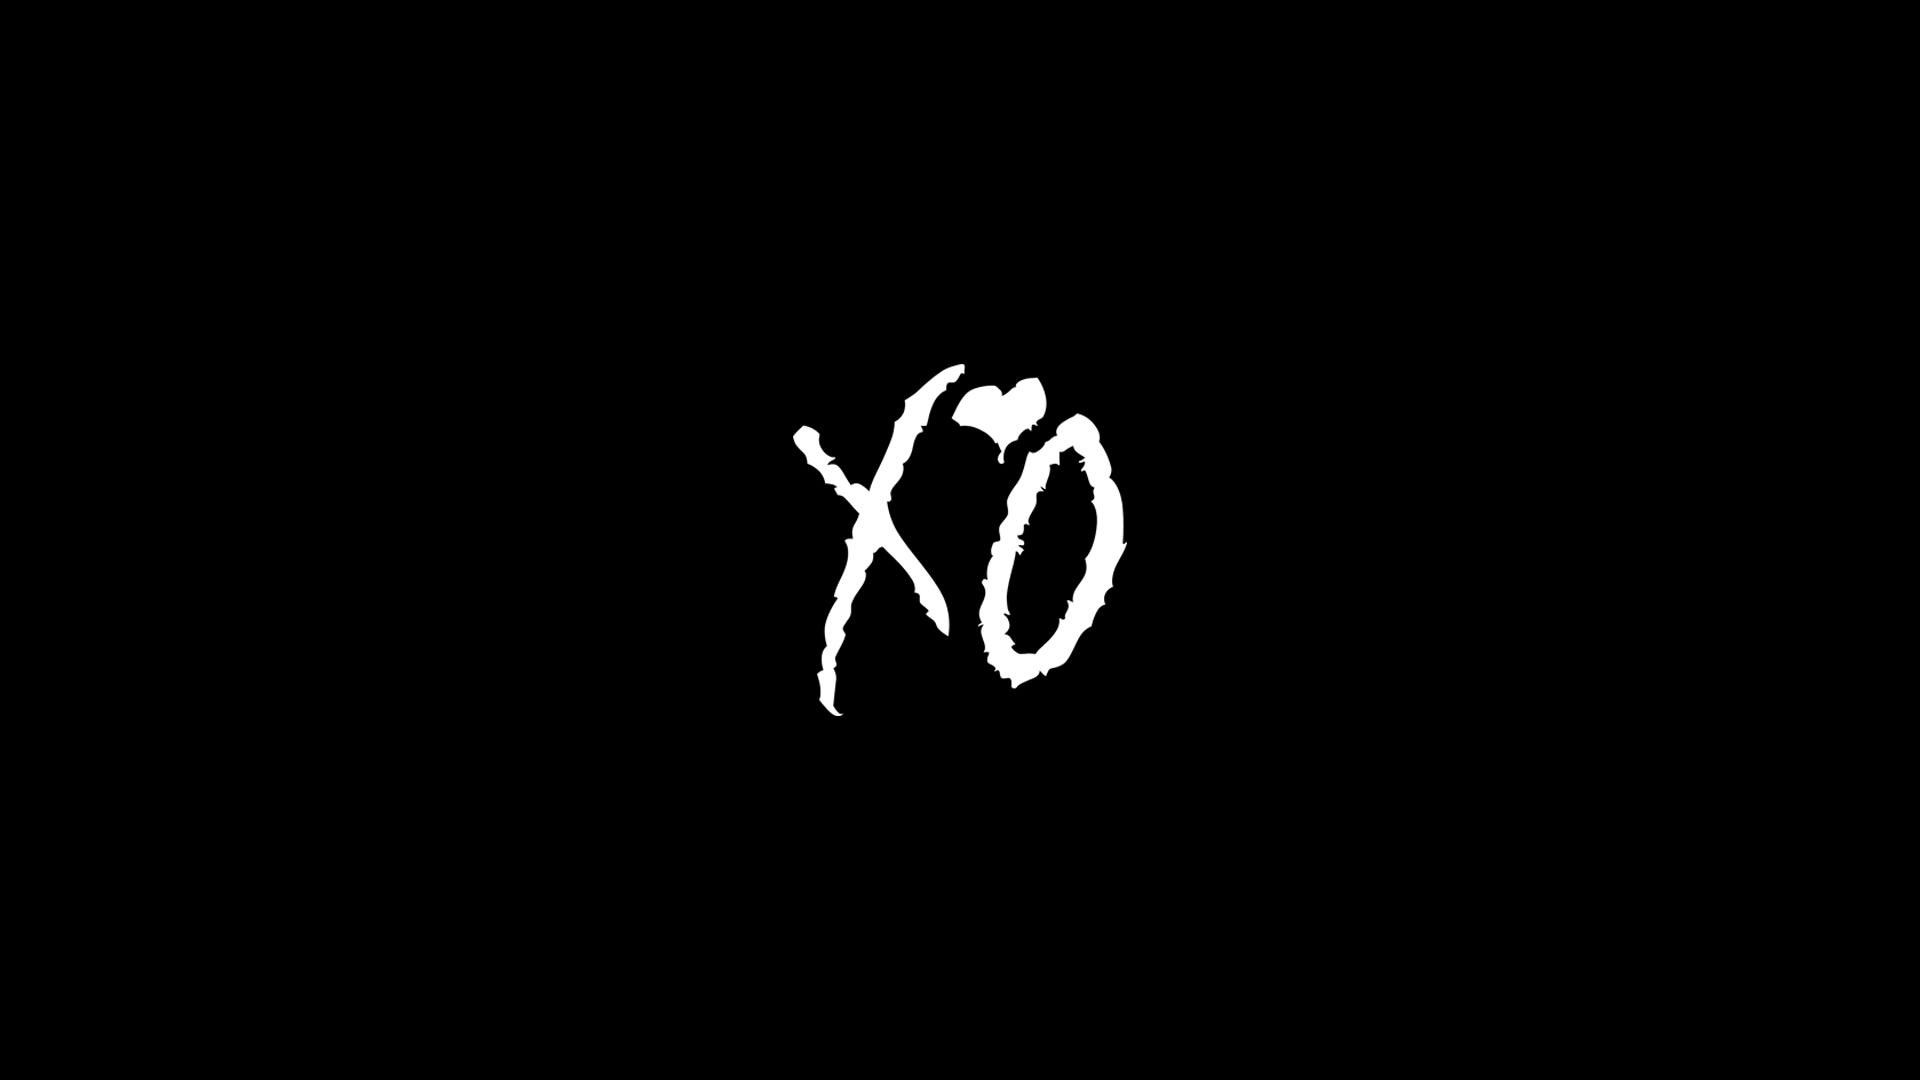 The Weeknd Xo Wallpaper Top Background